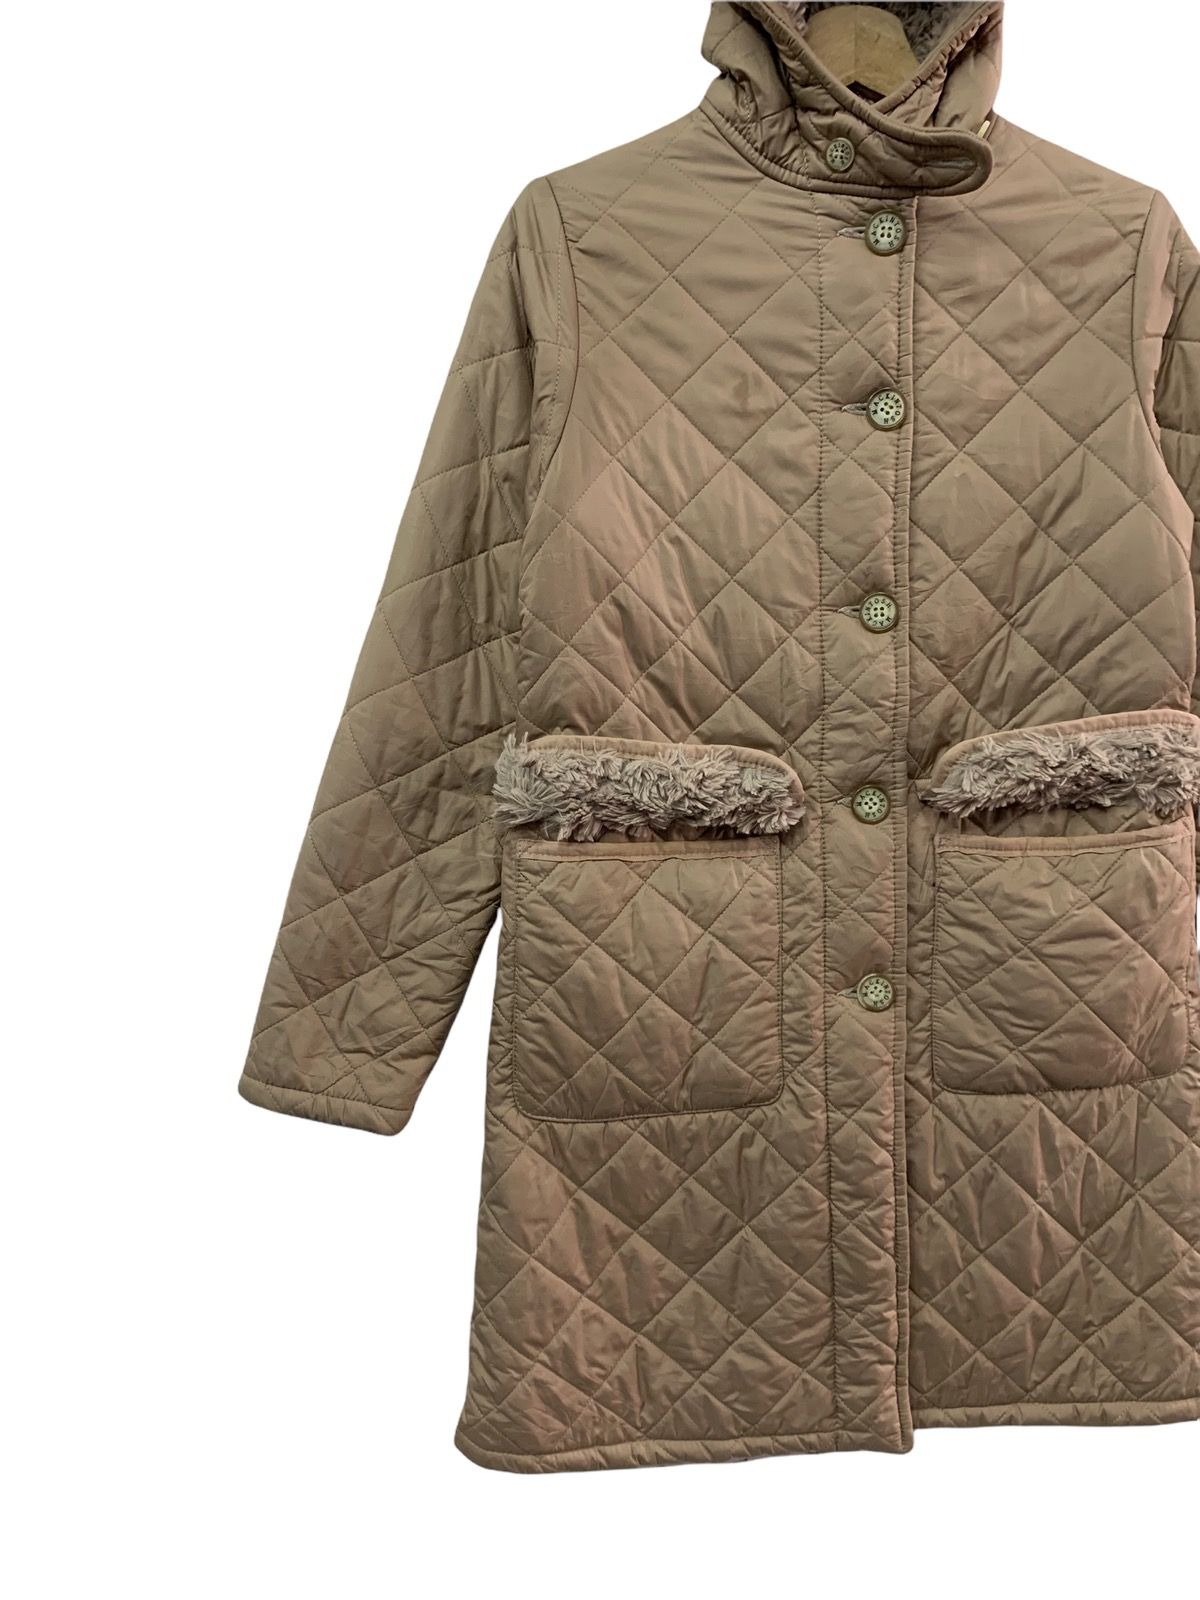 🔥MACKINTOSH SCOTLAND QUILTED FUR LINED LONG JACKETS - 4